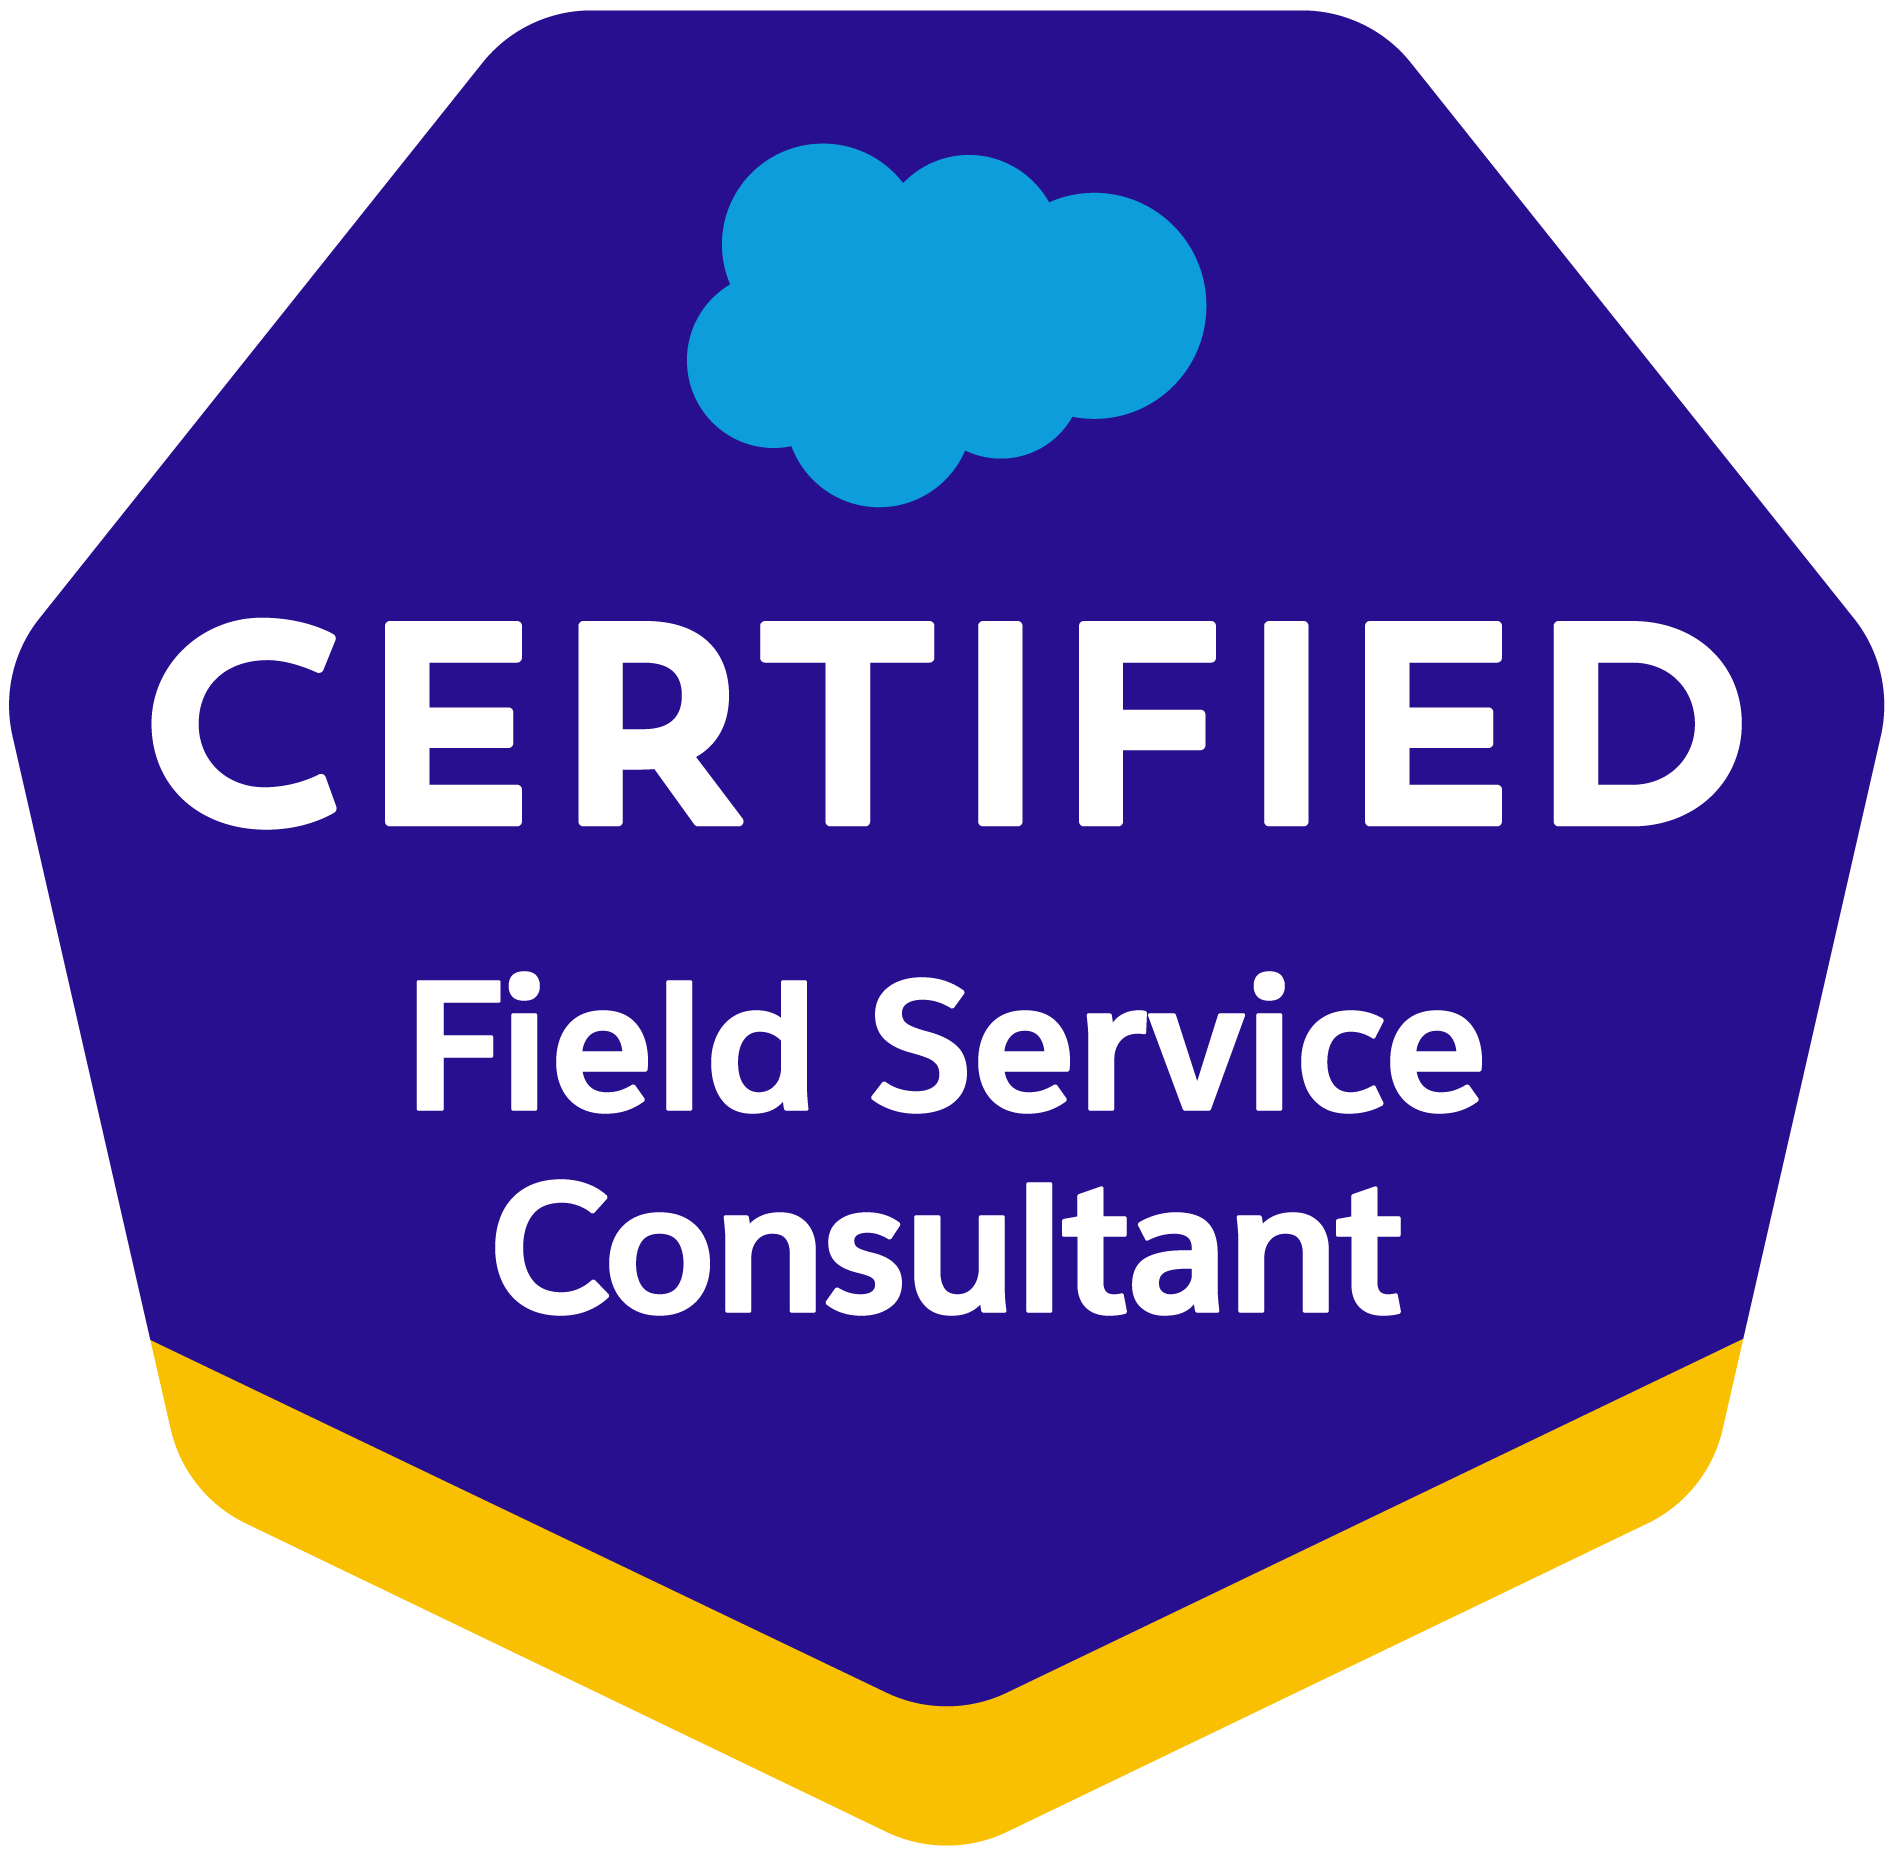 Field Service Consultant certification